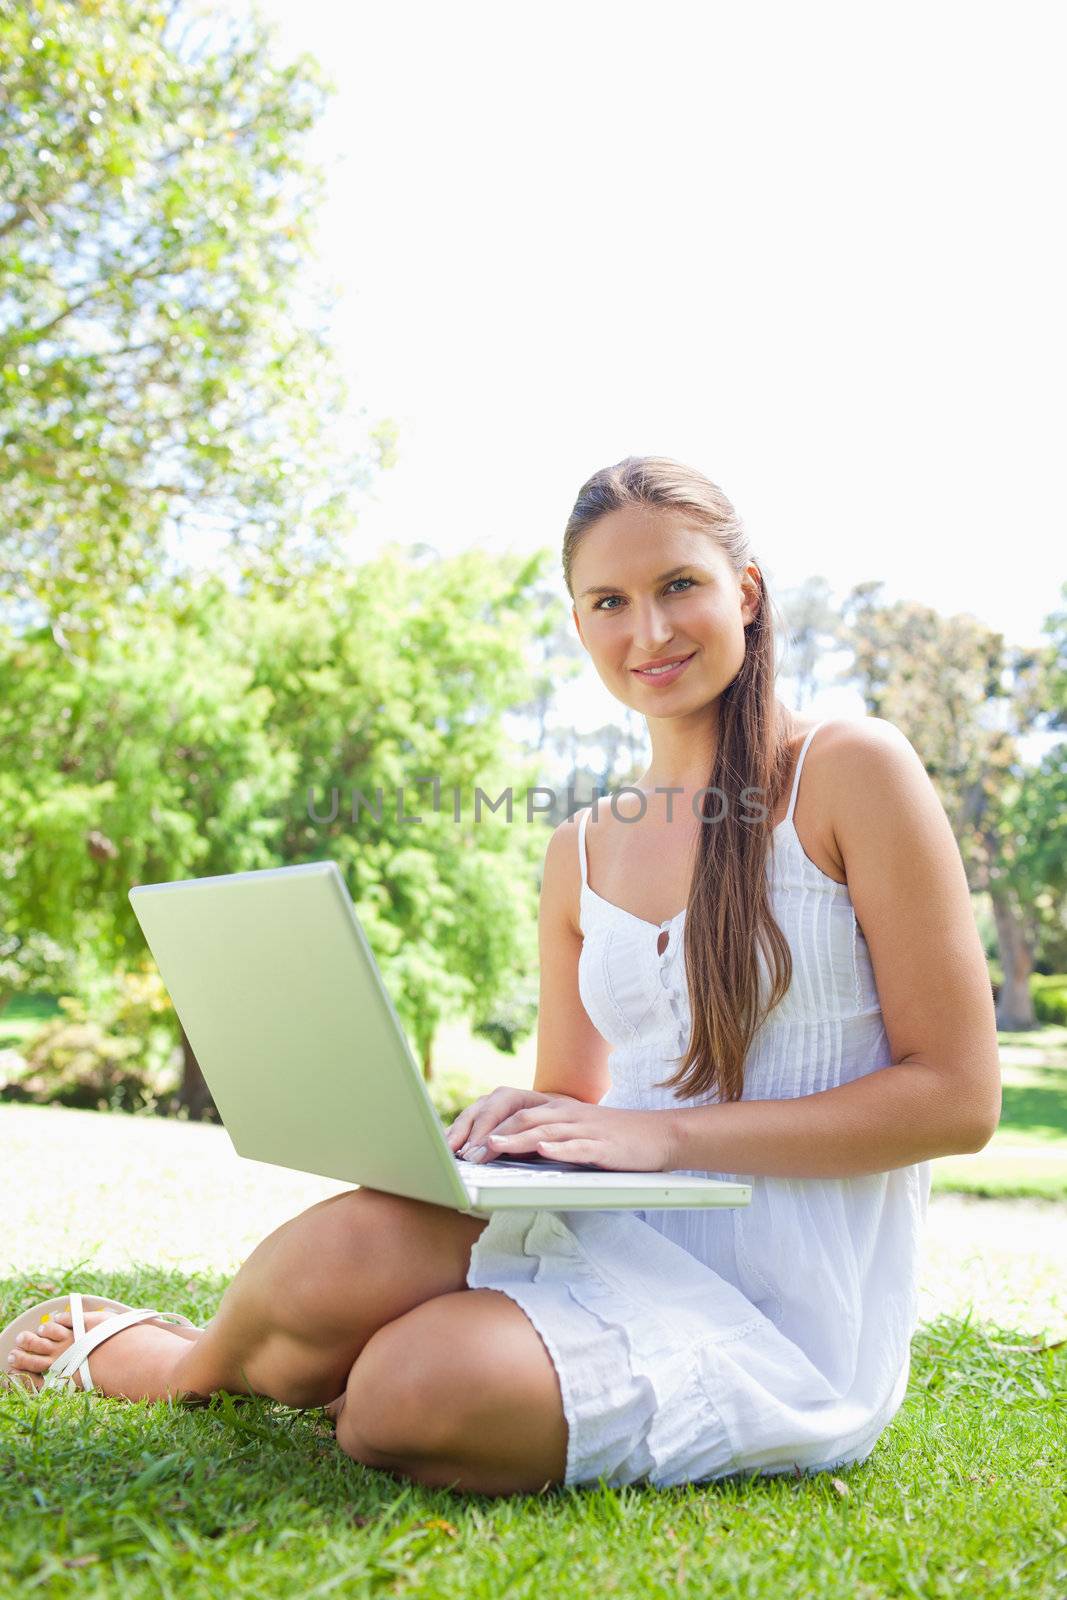 Smiling young woman on the lawn with her laptop